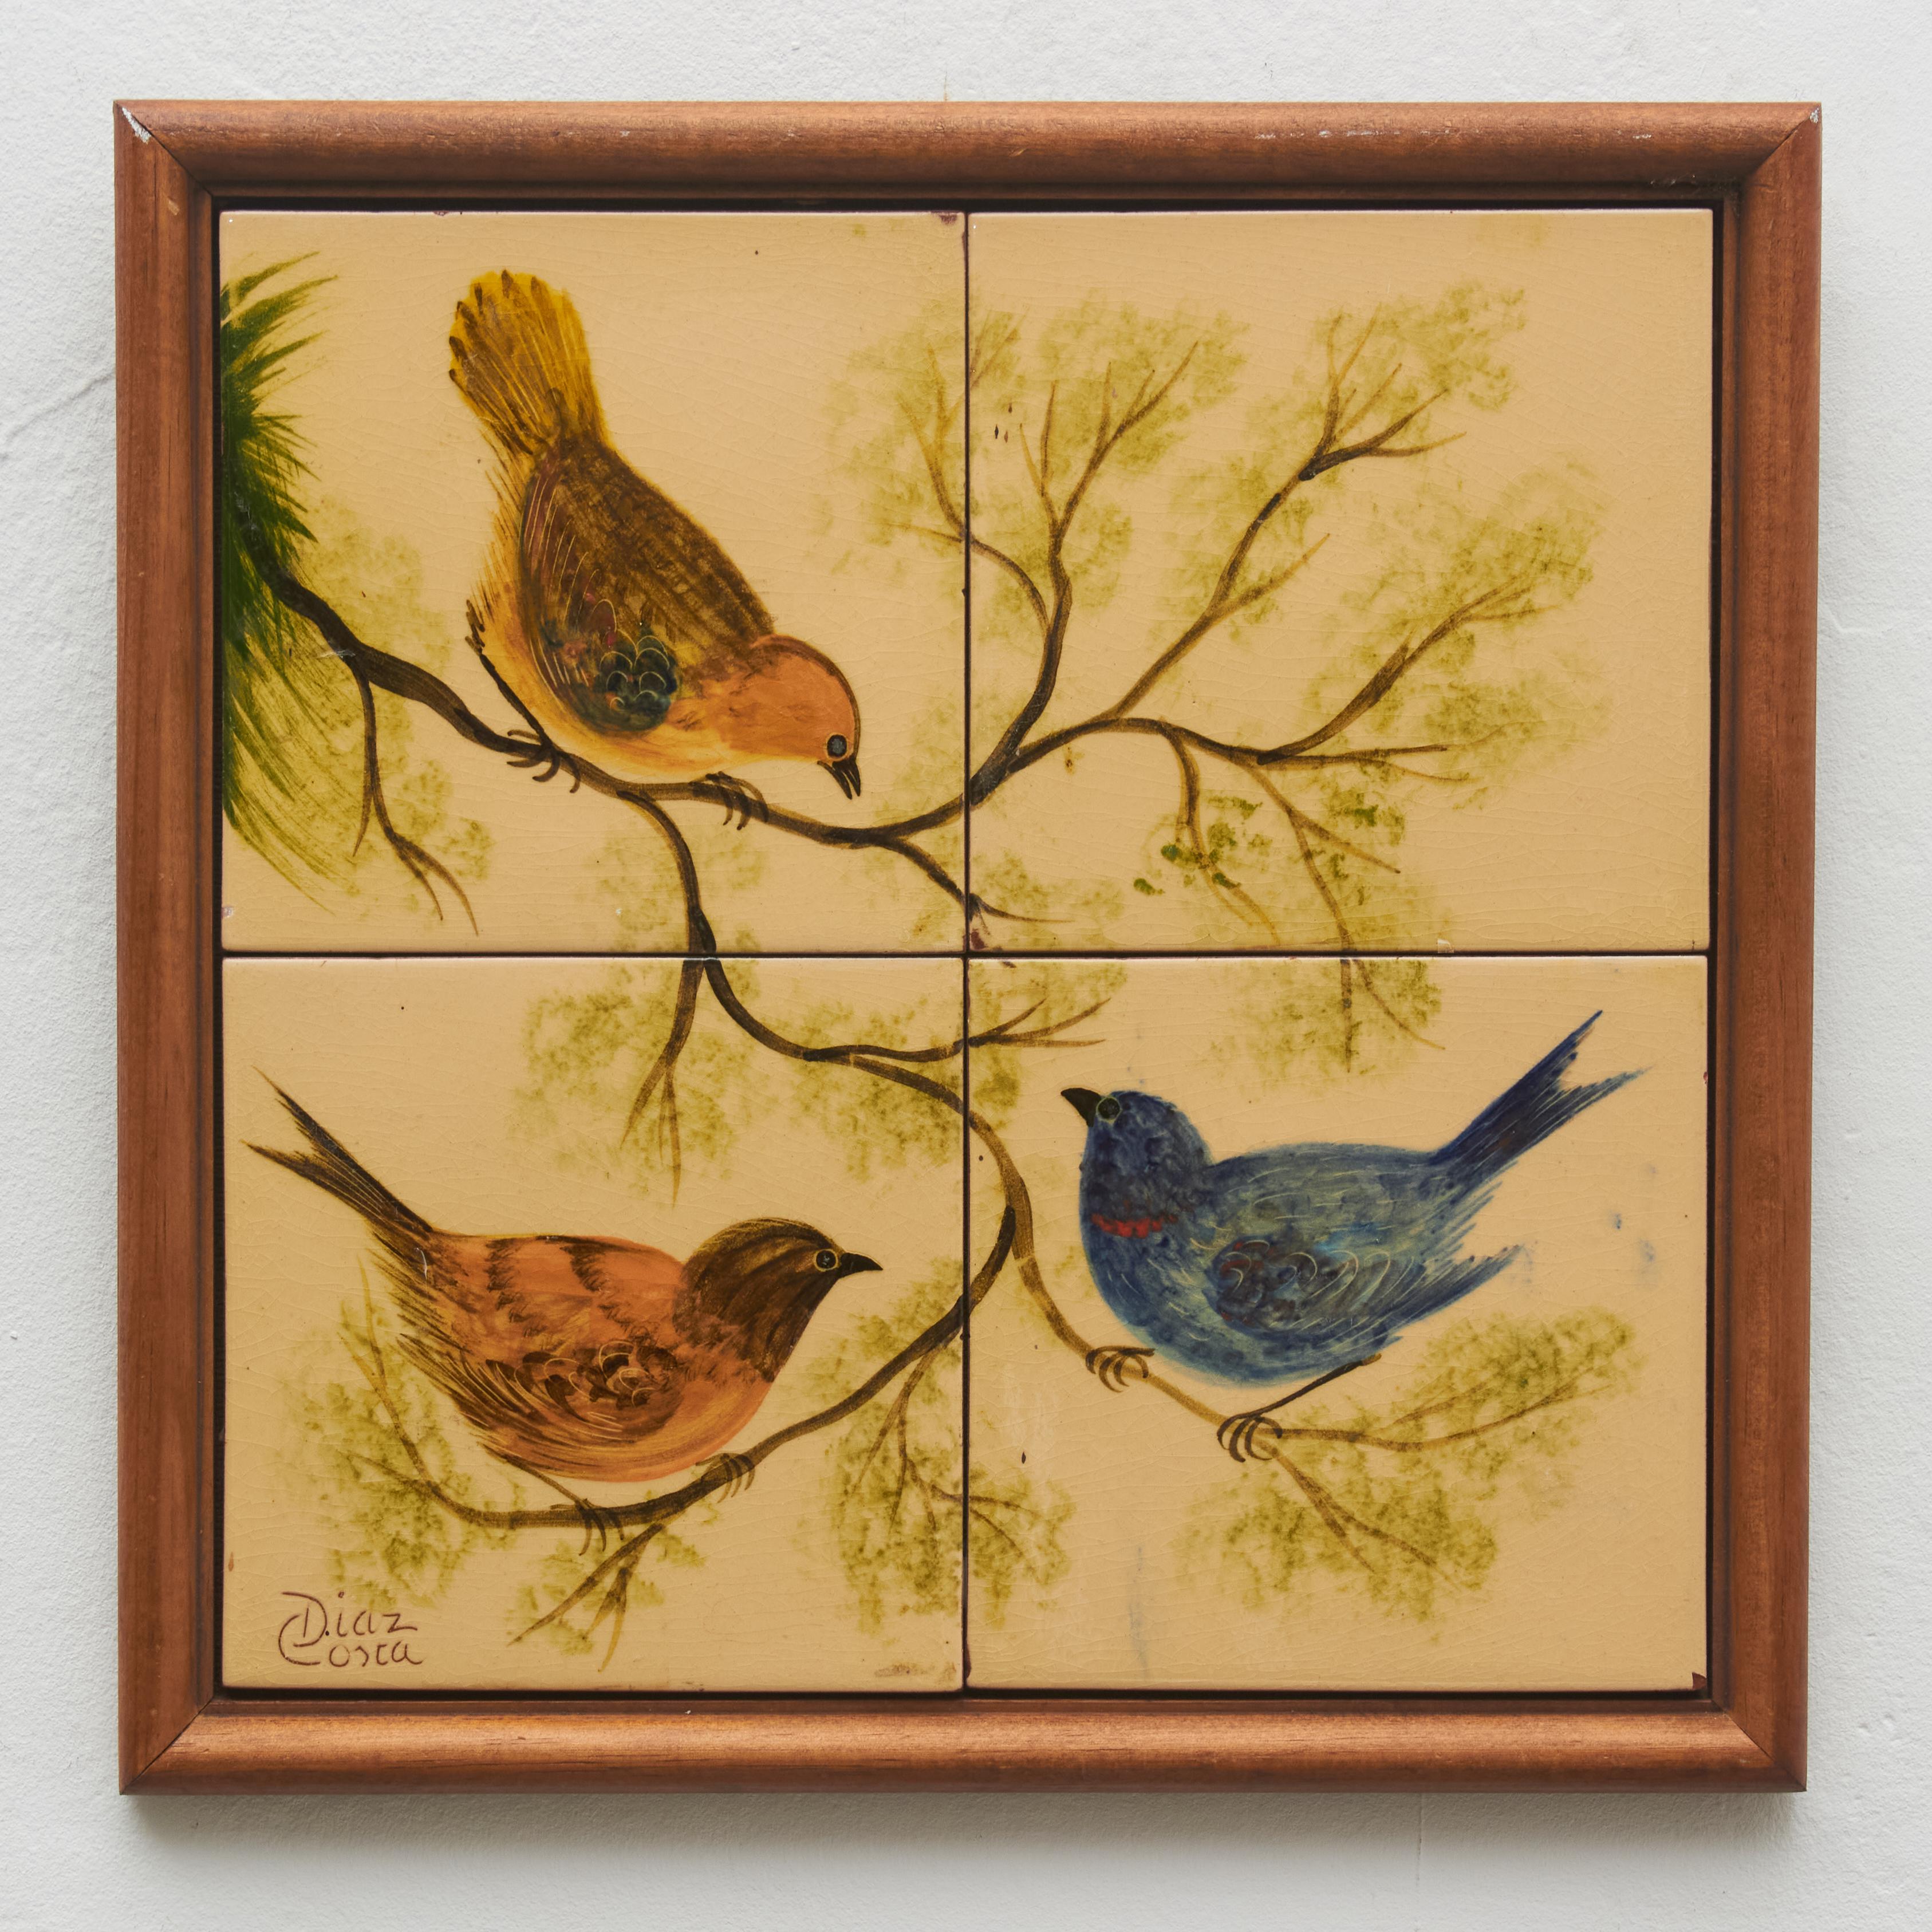 Ceramic hand painted artwork of several birds by Catalan artist Diaz Costa, circa 1960.
Framed. Signed.

In original condition, with minor wear consistent of age and use, preserving a beautiul patina.